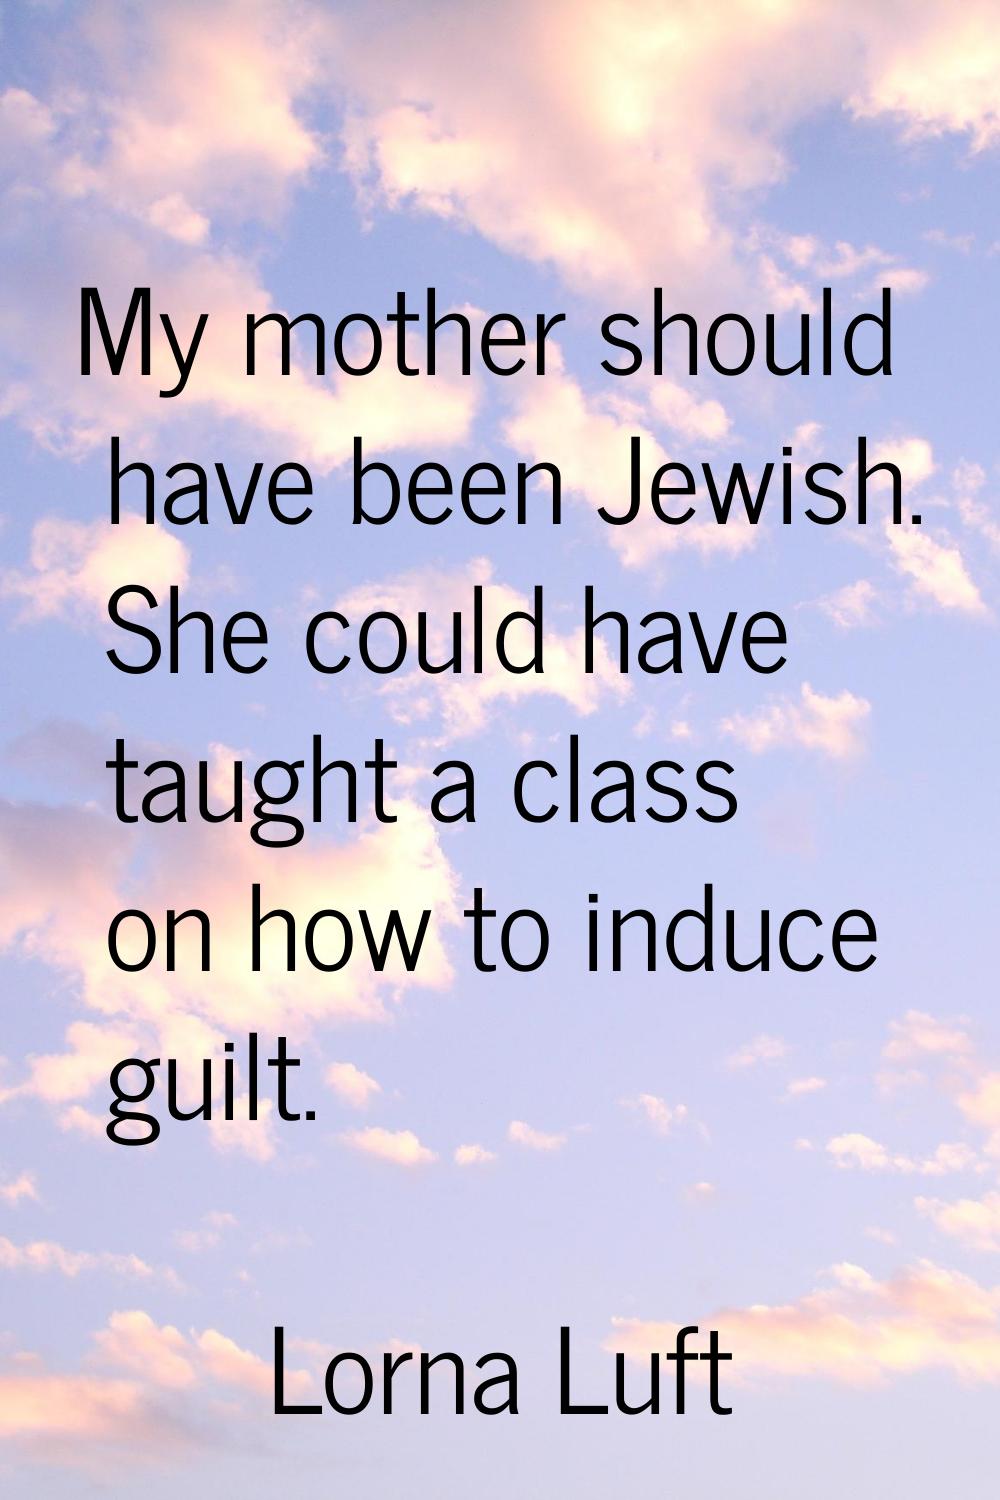 My mother should have been Jewish. She could have taught a class on how to induce guilt.